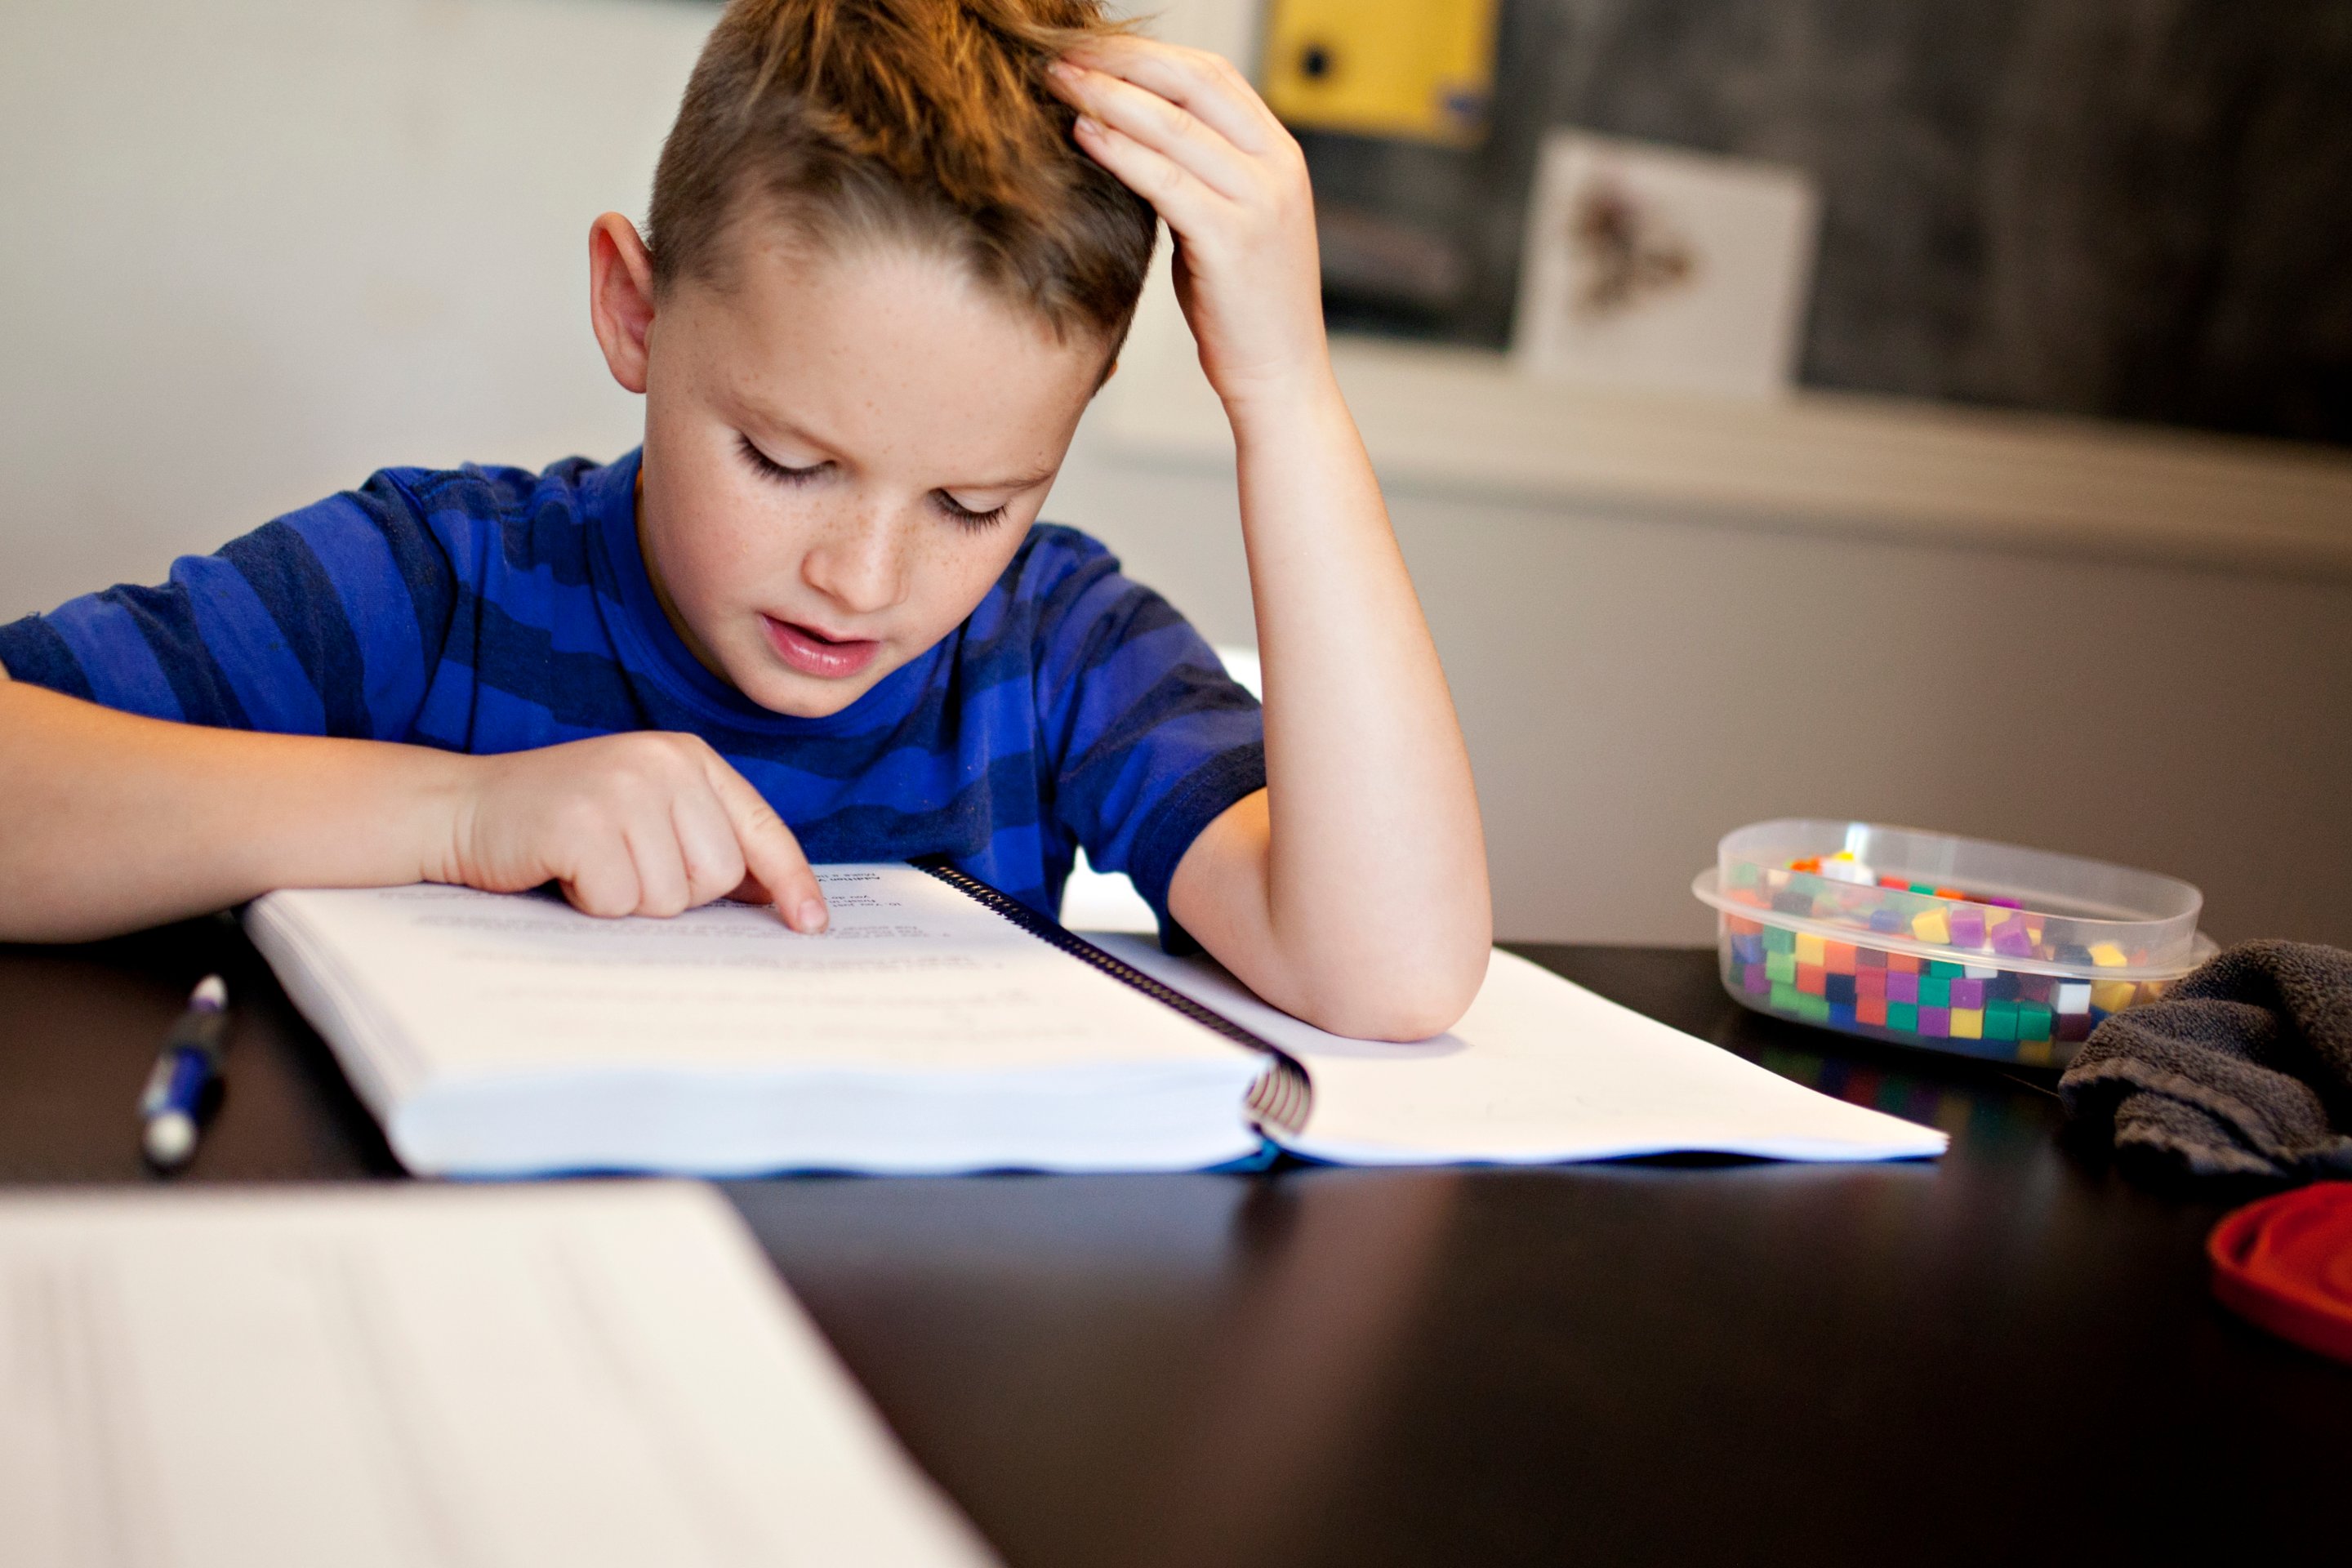 https://wpvip.edutopia.org/wp-content/uploads/2022/10/kids-doing-homework-math-problems-at-the-kitchen-table-at-home_t20_K6blK1_master.jpg?w=2880&quality=85